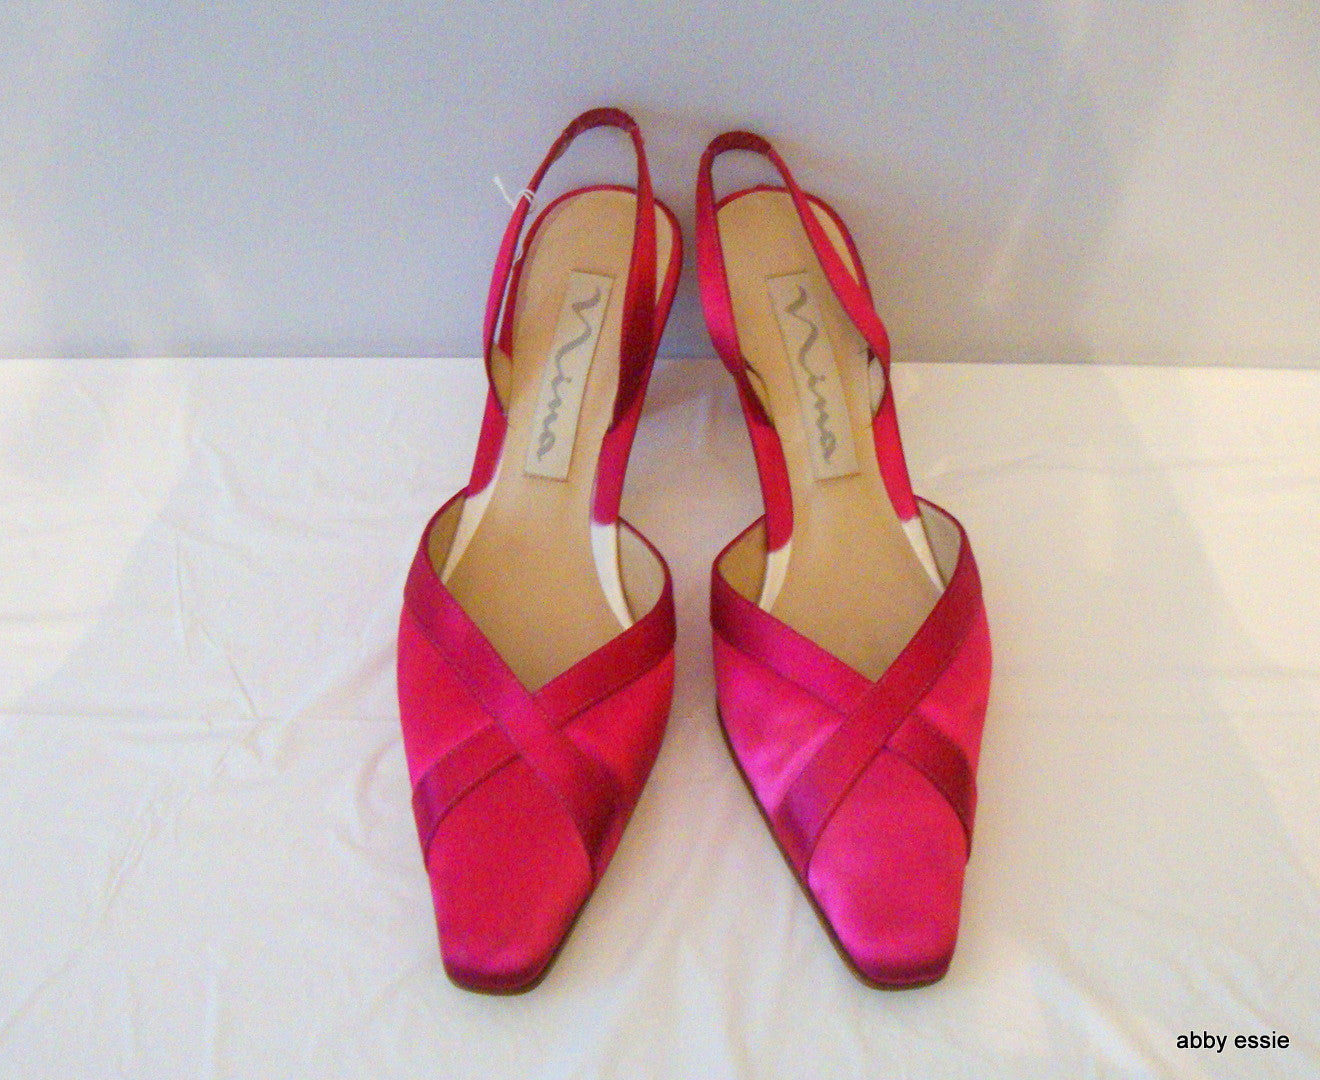 Hot Pink Satin Sling Back Mules 8.5M Abby Essie